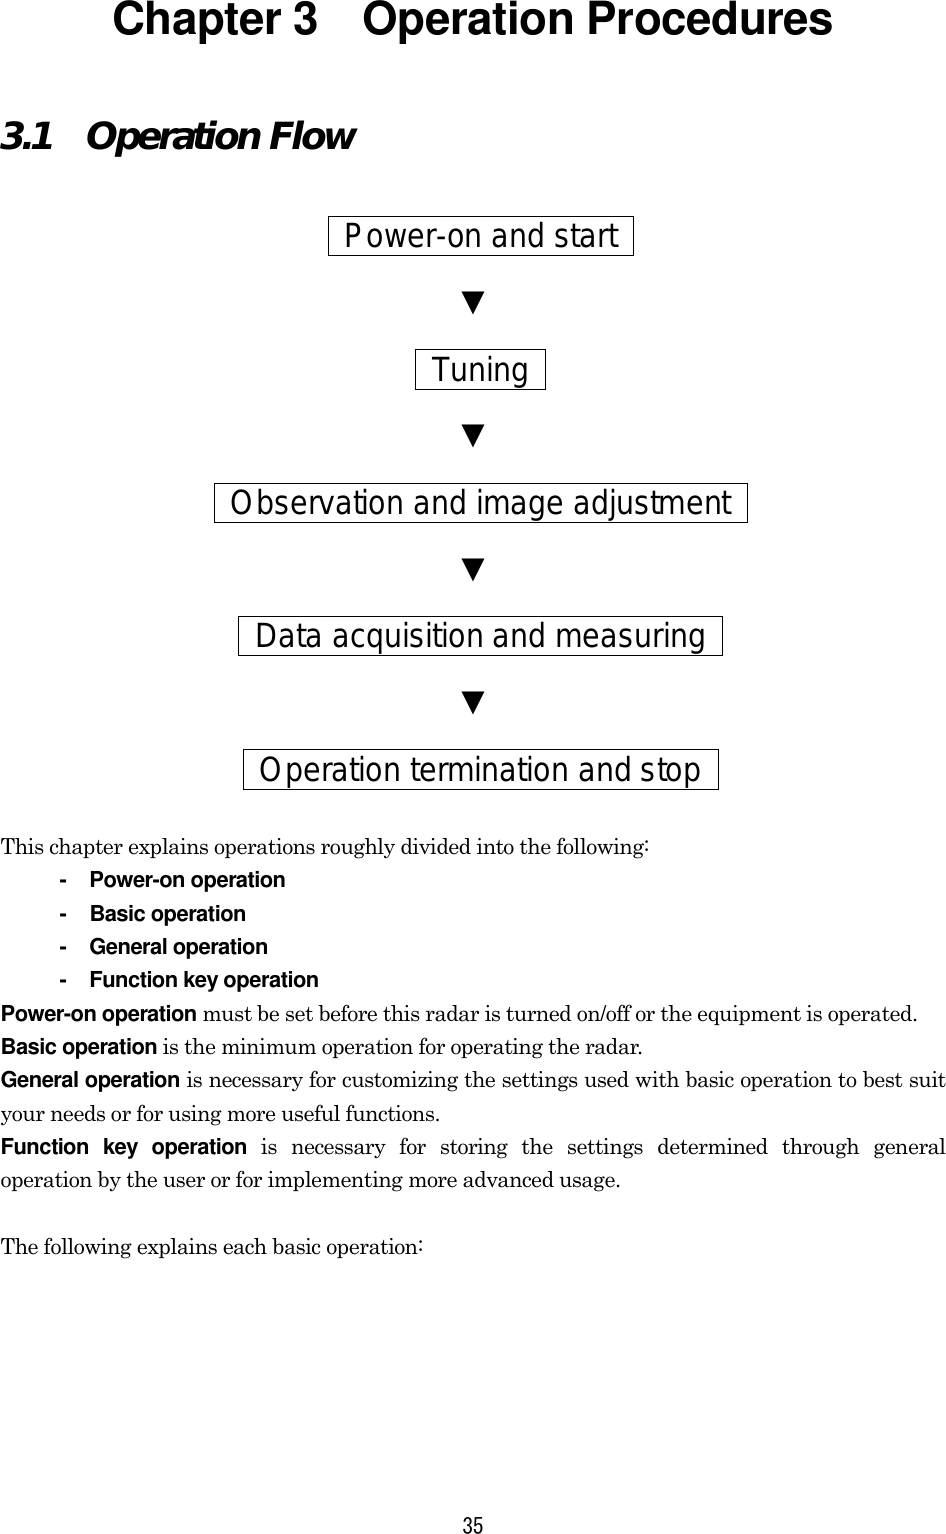 35 Chapter 3    Operation Procedures 3.1  Operation Flow   Power-on and start  ▼  Tuning  ▼  Observation and image adjustment   ▼  Data acquisition and measuring   ▼  Operation termination and stop   This chapter explains operations roughly divided into the following: - Power-on operation - Basic operation - General operation -  Function key operation Power-on operation must be set before this radar is turned on/off or the equipment is operated. Basic operation is the minimum operation for operating the radar. General operation is necessary for customizing the settings used with basic operation to best suit your needs or for using more useful functions. Function key operation is necessary for storing the settings determined through general operation by the user or for implementing more advanced usage.  The following explains each basic operation: 